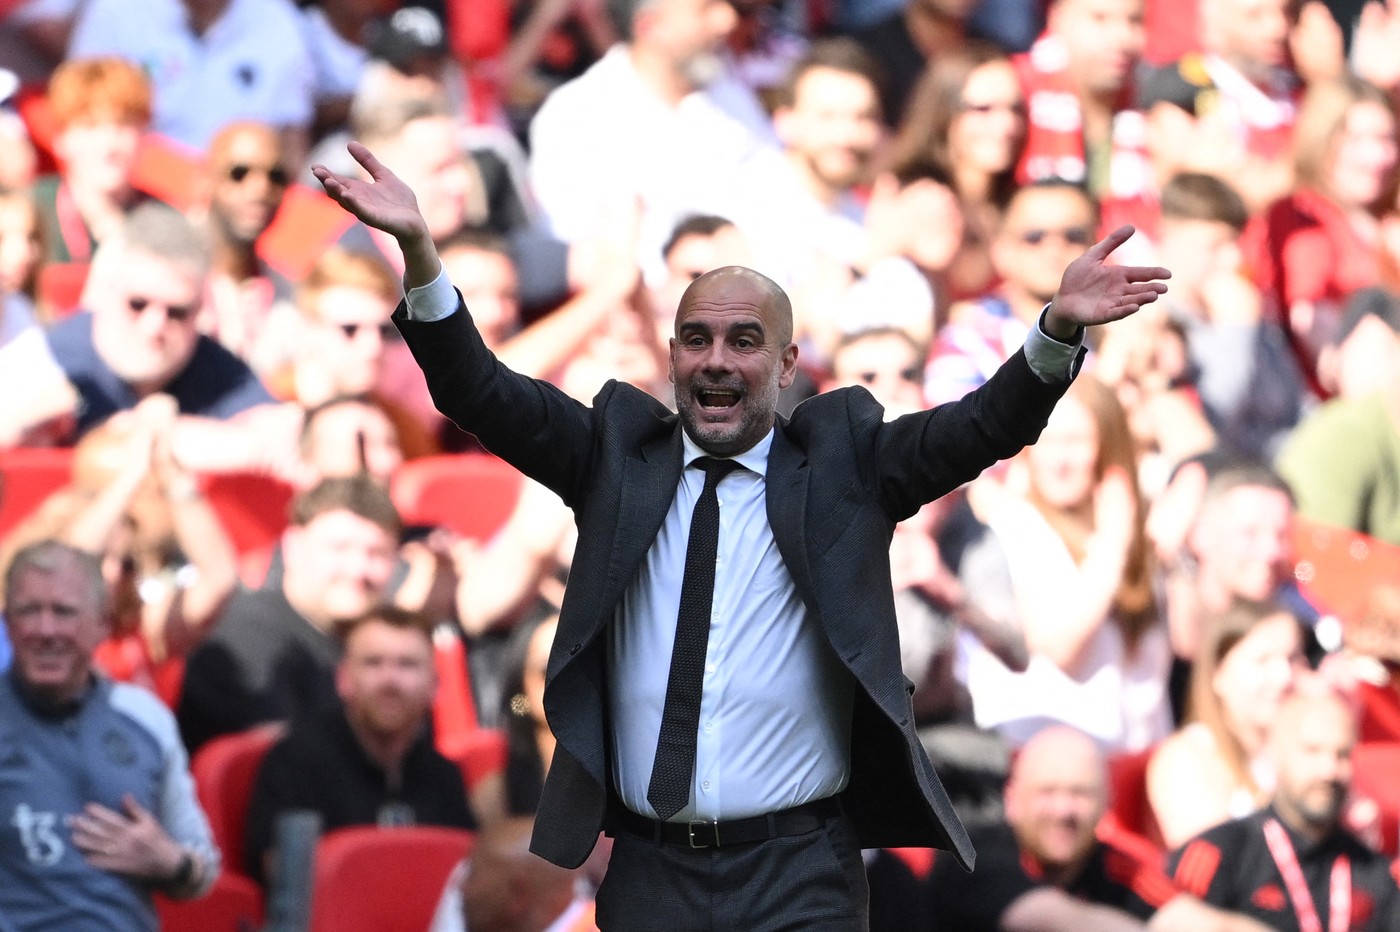 Manchester City's Spanish manager Pep Guardiola reacts during the English FA Cup final football match between Manchester City and Manchester United at Wembley stadium, in London, on May 25, 2024.,Image: 876375250, License: Rights-managed, Restrictions: NOT FOR MARKETING OR ADVERTISING USE / RESTRICTED TO EDITORIAL USE, Model Release: no, Credit line: JUSTIN TALLIS / AFP / Profimedia